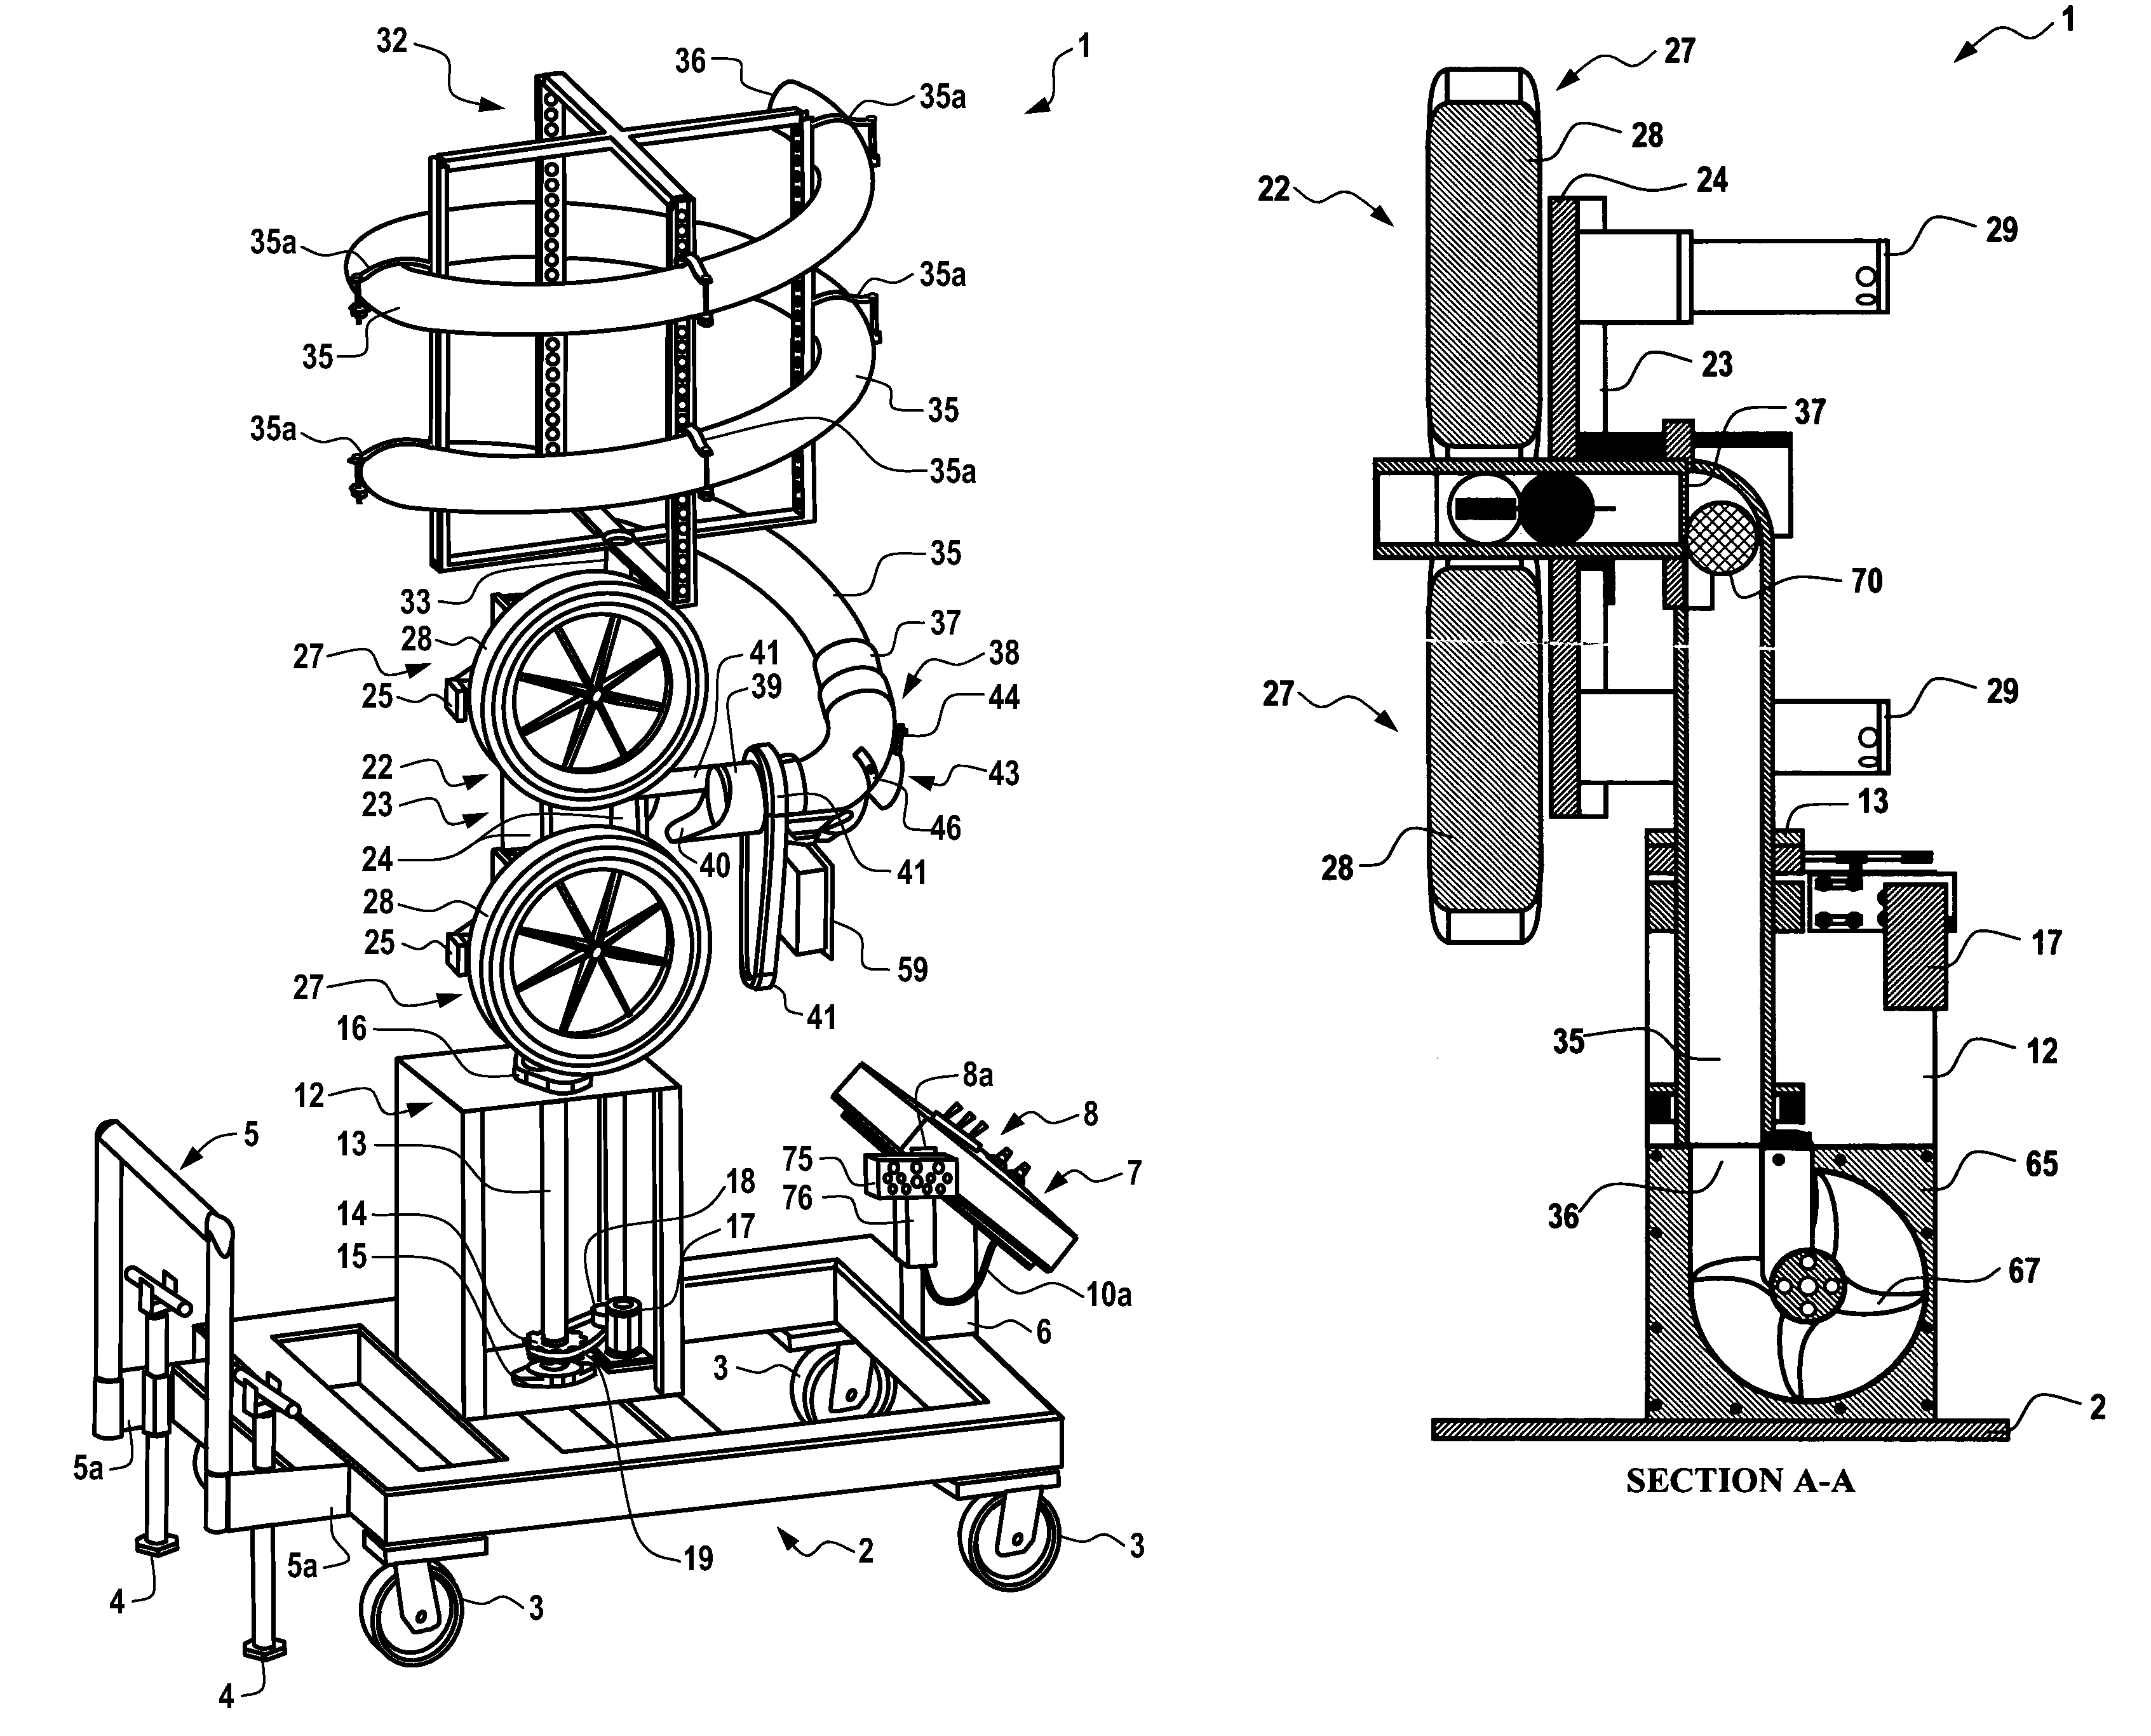 Programmable ball throwing apparatus